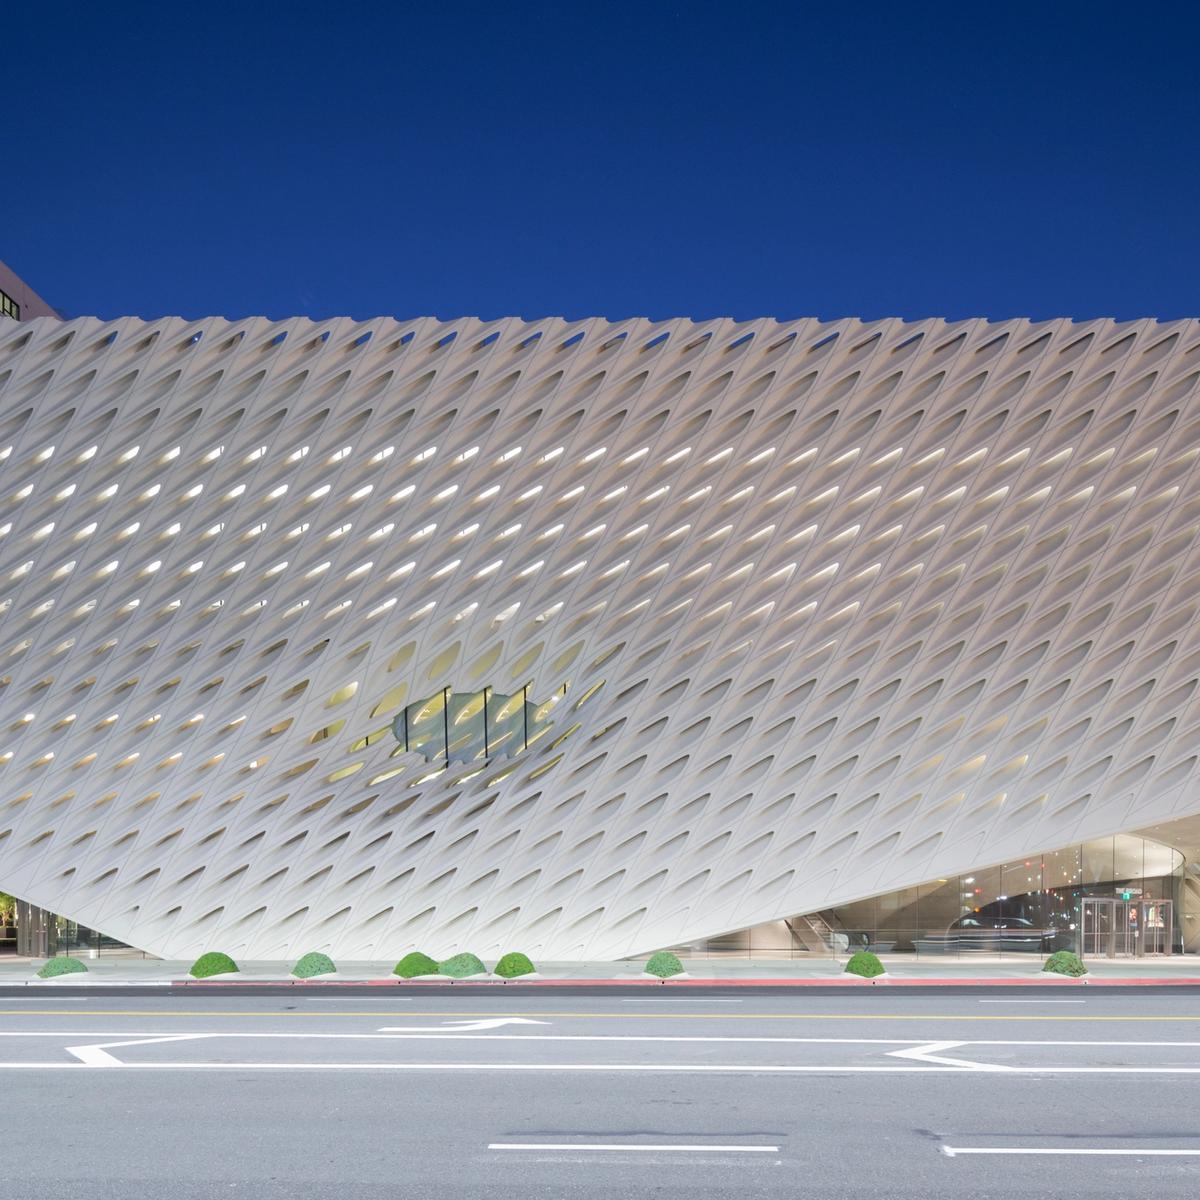 The broad